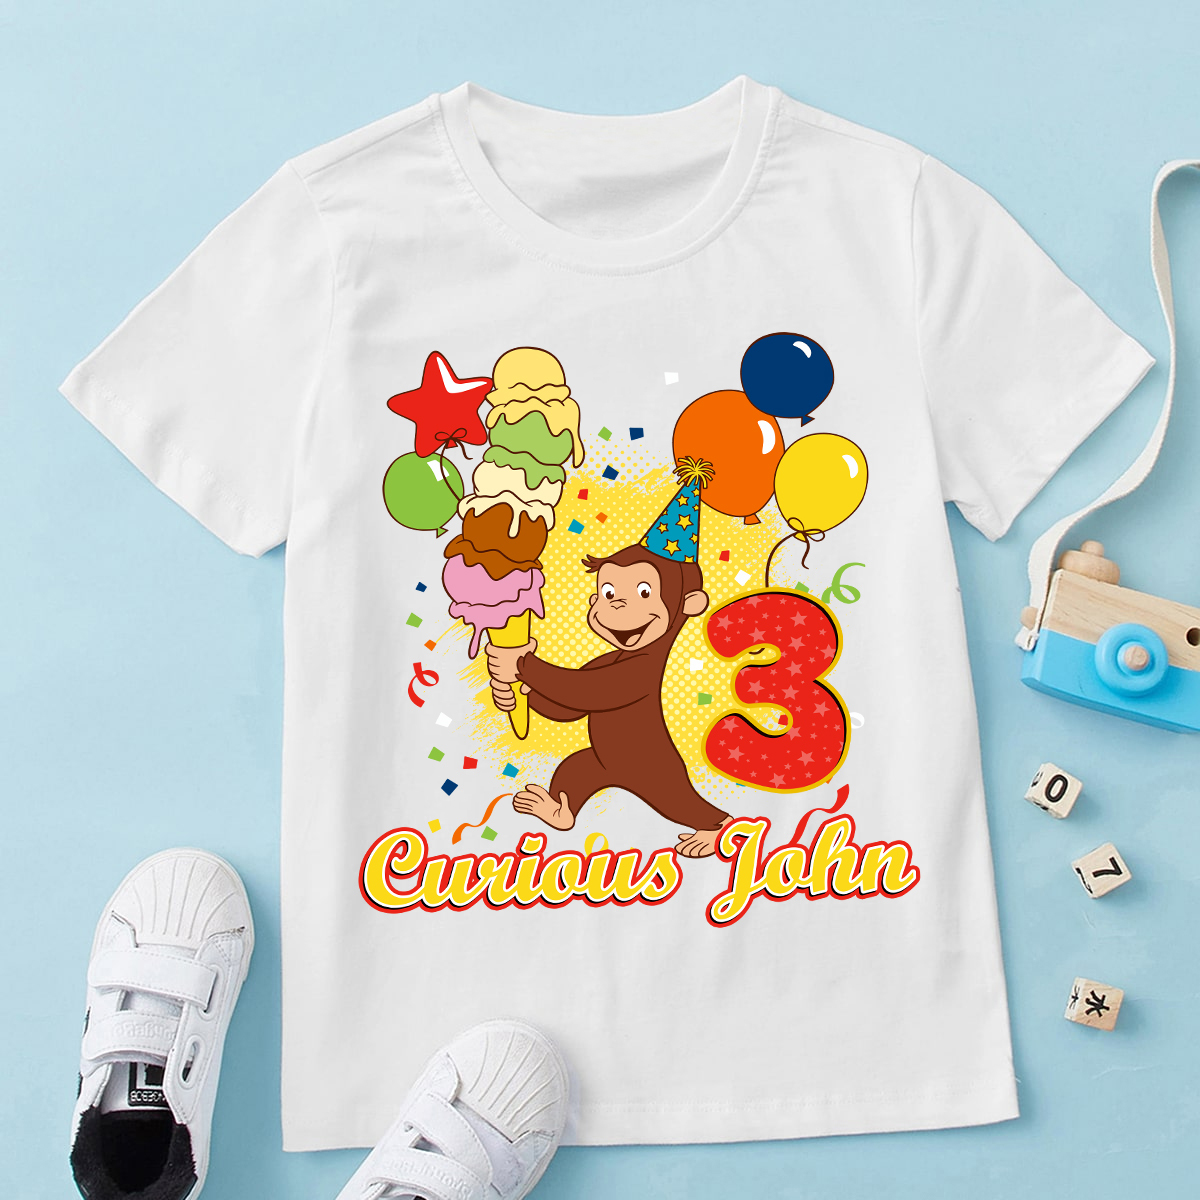 Personalized Curious George Birthday Shirt, Custom Name and Age, Customized Curious George Shirts, Family Tee, Monkey Curious George Tee